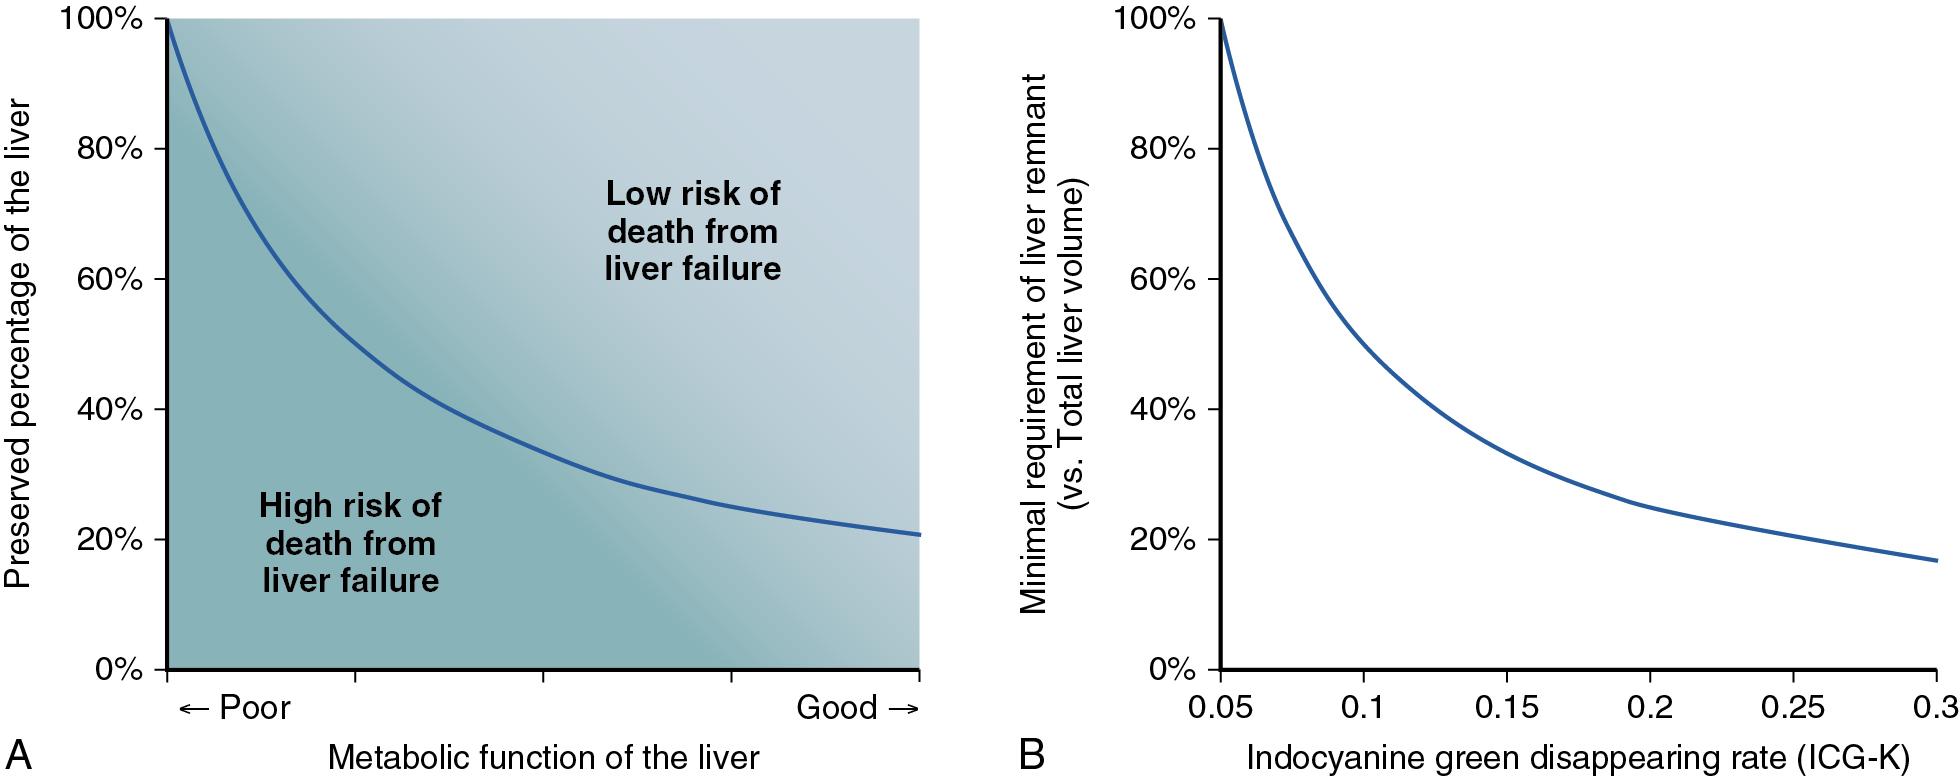 FIGURE 102C.1, The risk of postoperative hepatic insufficiency and death from liver failure has empirically been defined by the percentage of the liver remnant after surgery determined according to the metabolic function of the underlying liver (A). The estimated minimal requirement for future liver remnant volume calculated from the indocyanine green disappearance rate (ICG-K) according to expanded Makuuchi’s criteria clearly shows a similar threshold curve for the risk of mortality after hepatectomy (B).